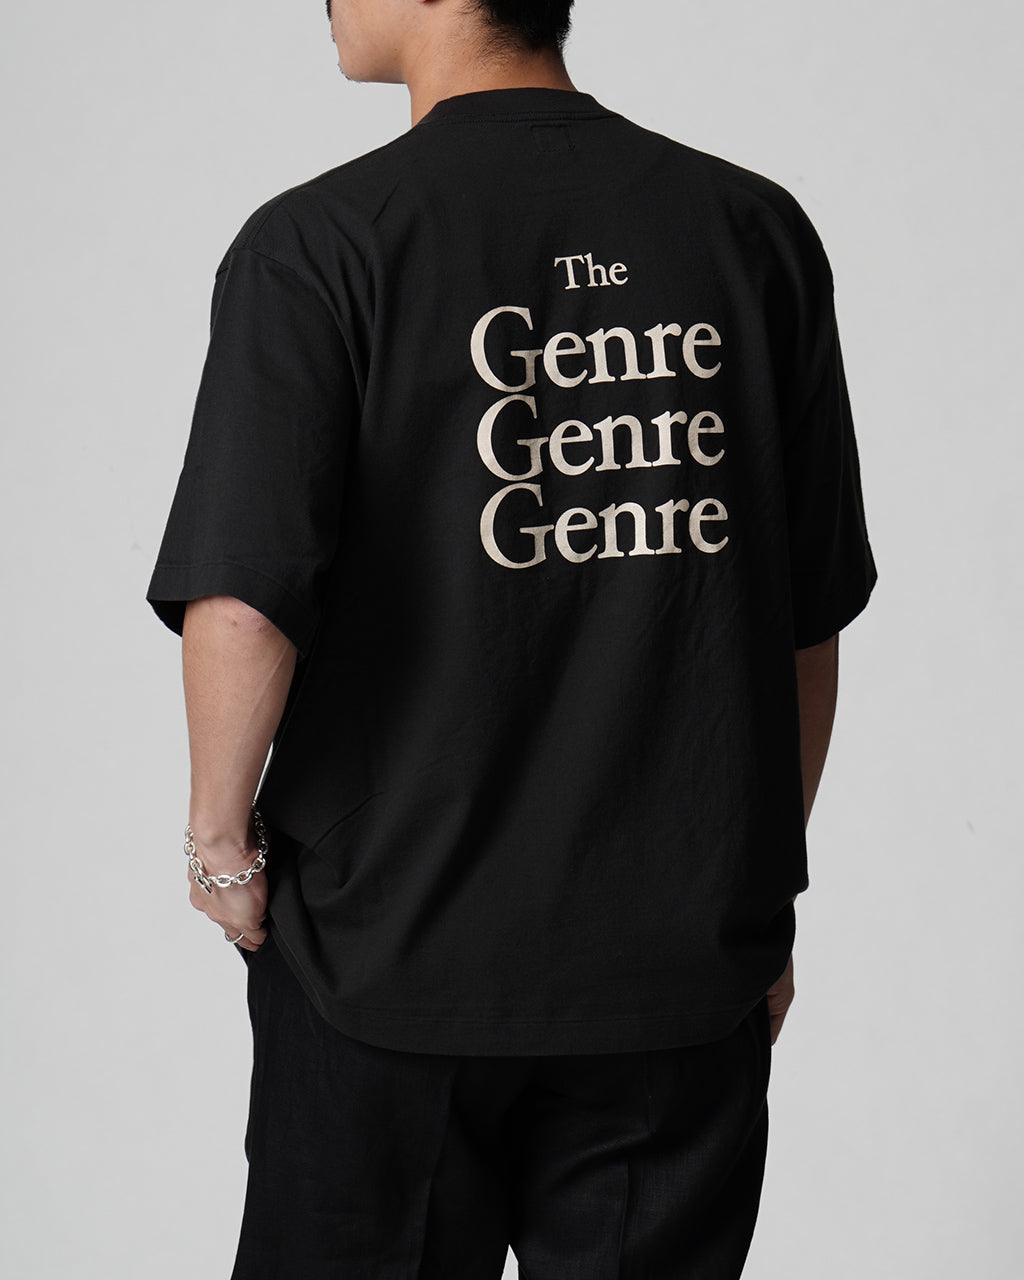 blurhms ROOTSTOCK ブラームス ルーツストックプリント Tシャツ ワイド The Genre The Print Tee WIDE 【送料無料】正規取扱店